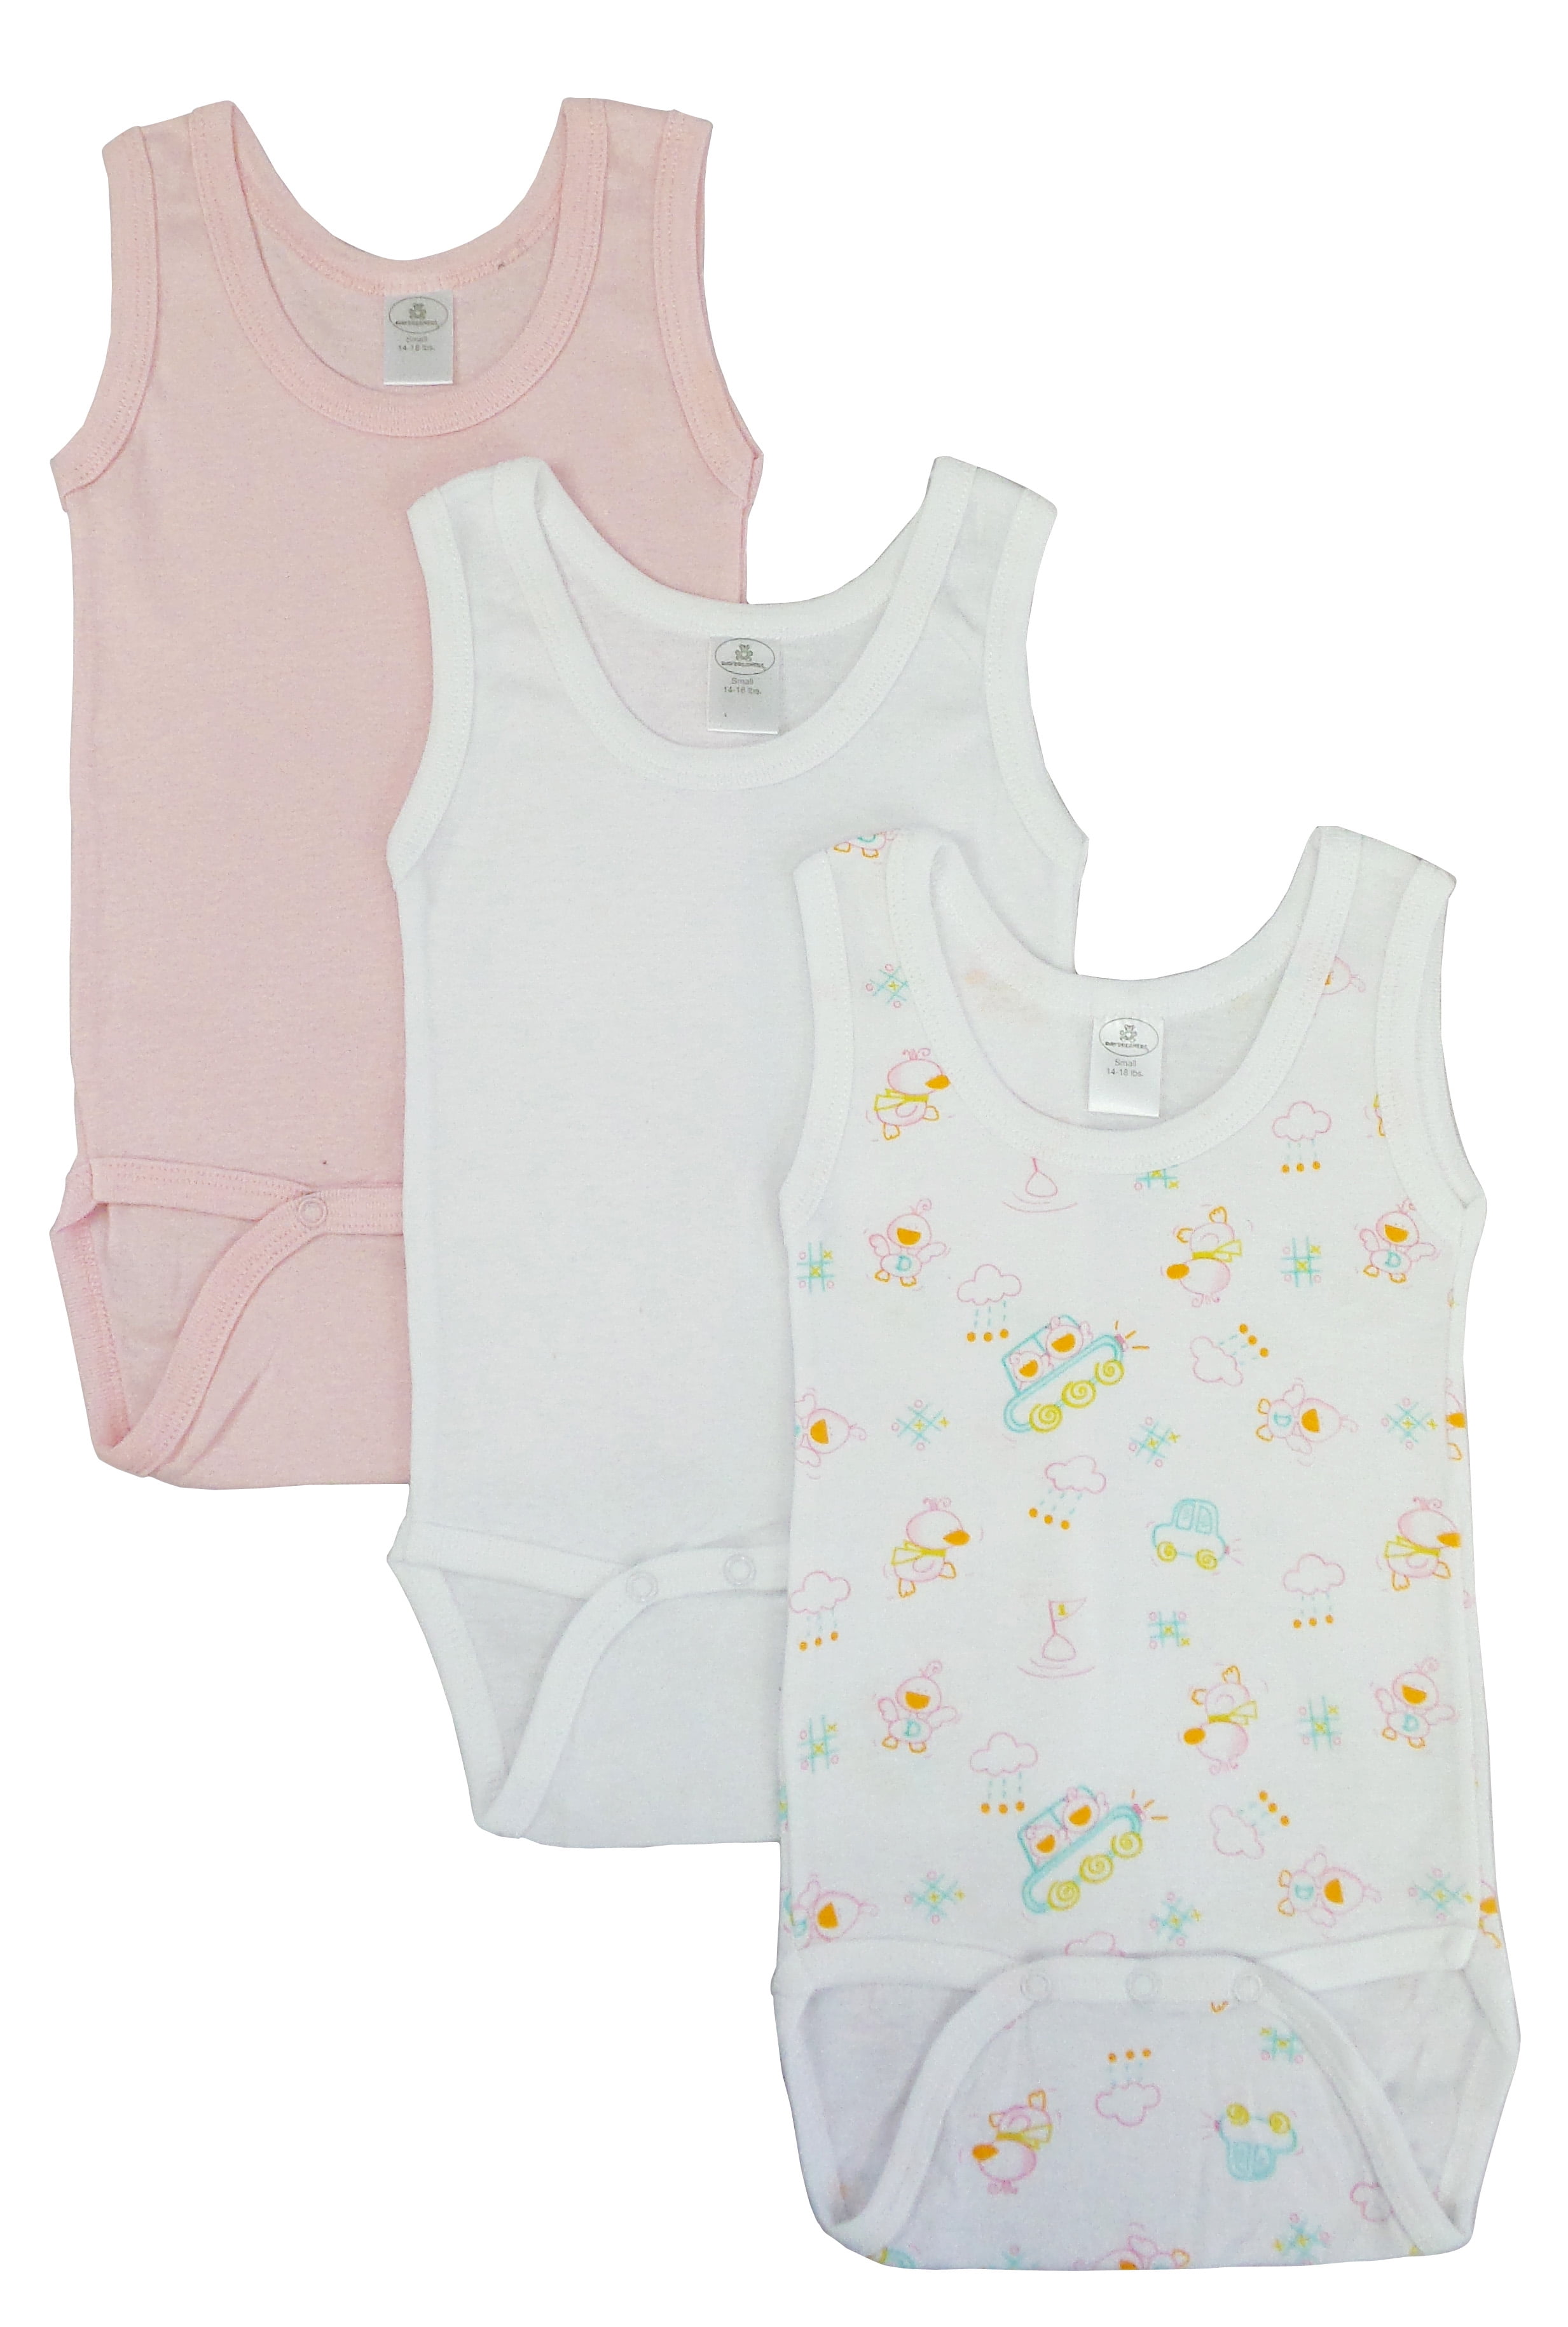 bambini Baby Infant 3-Pack Sleeveless T-Shirts Pink/Yellow 12-18 Months 